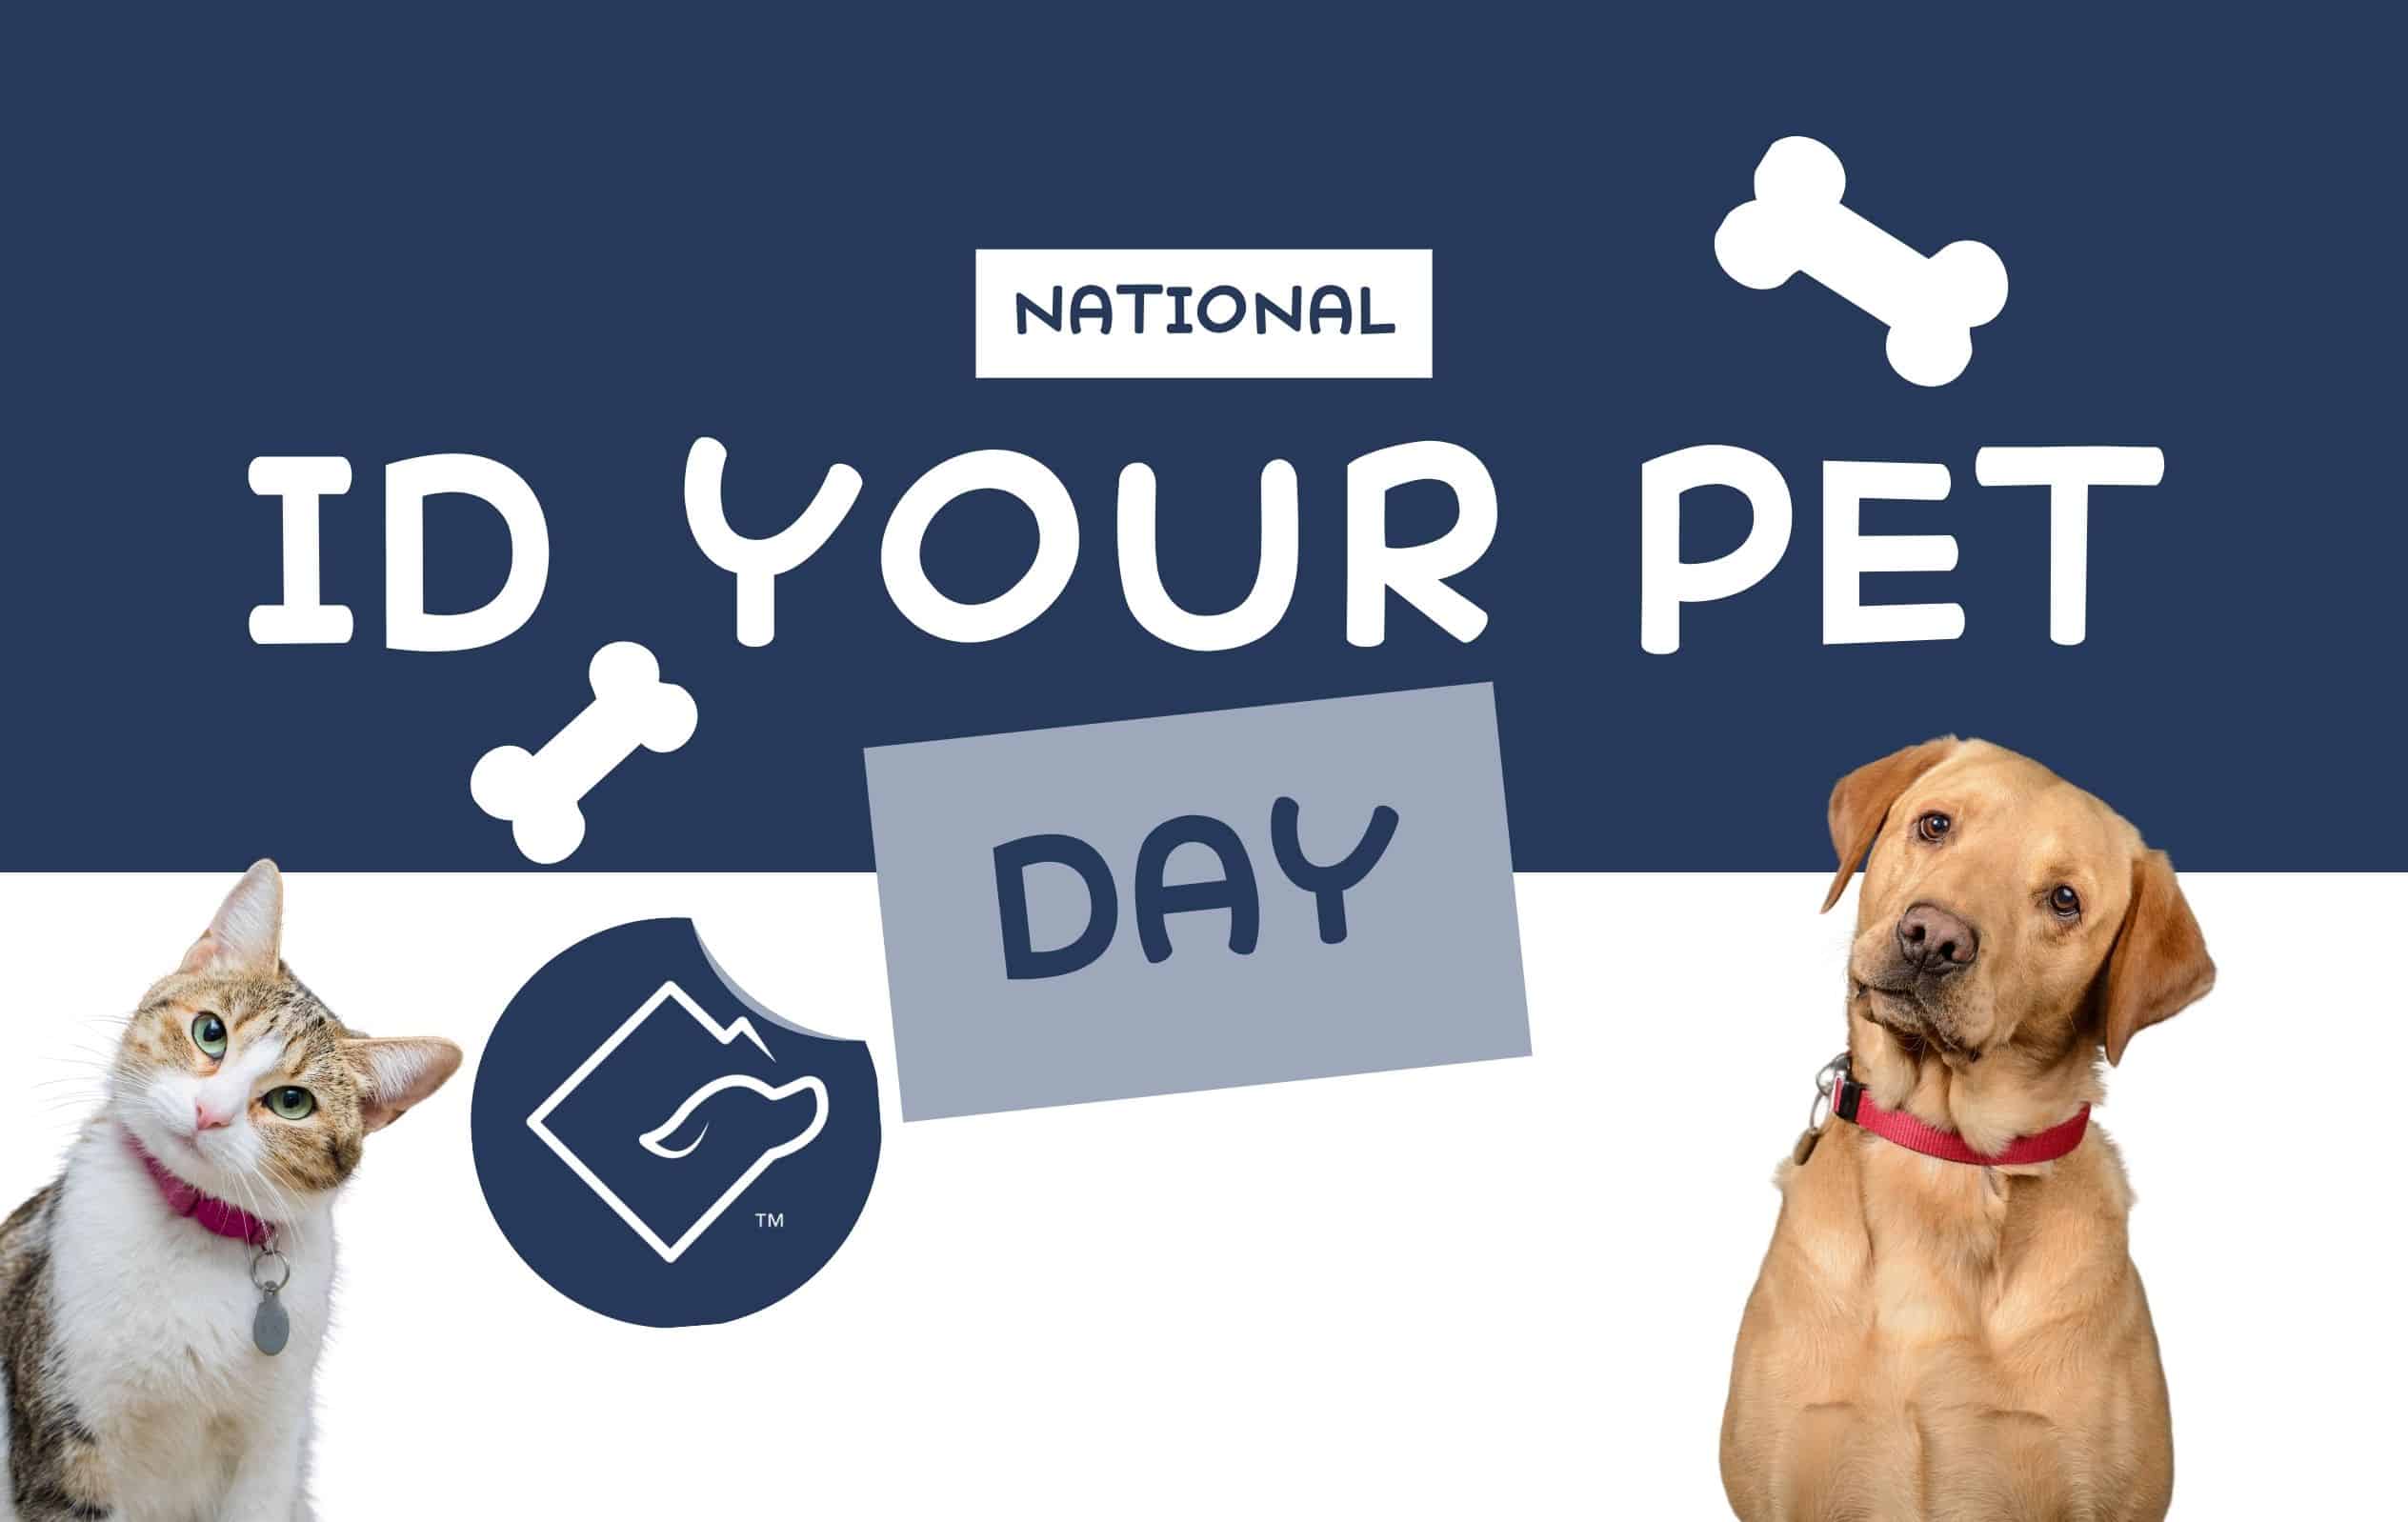 National ID Your Pet Day!